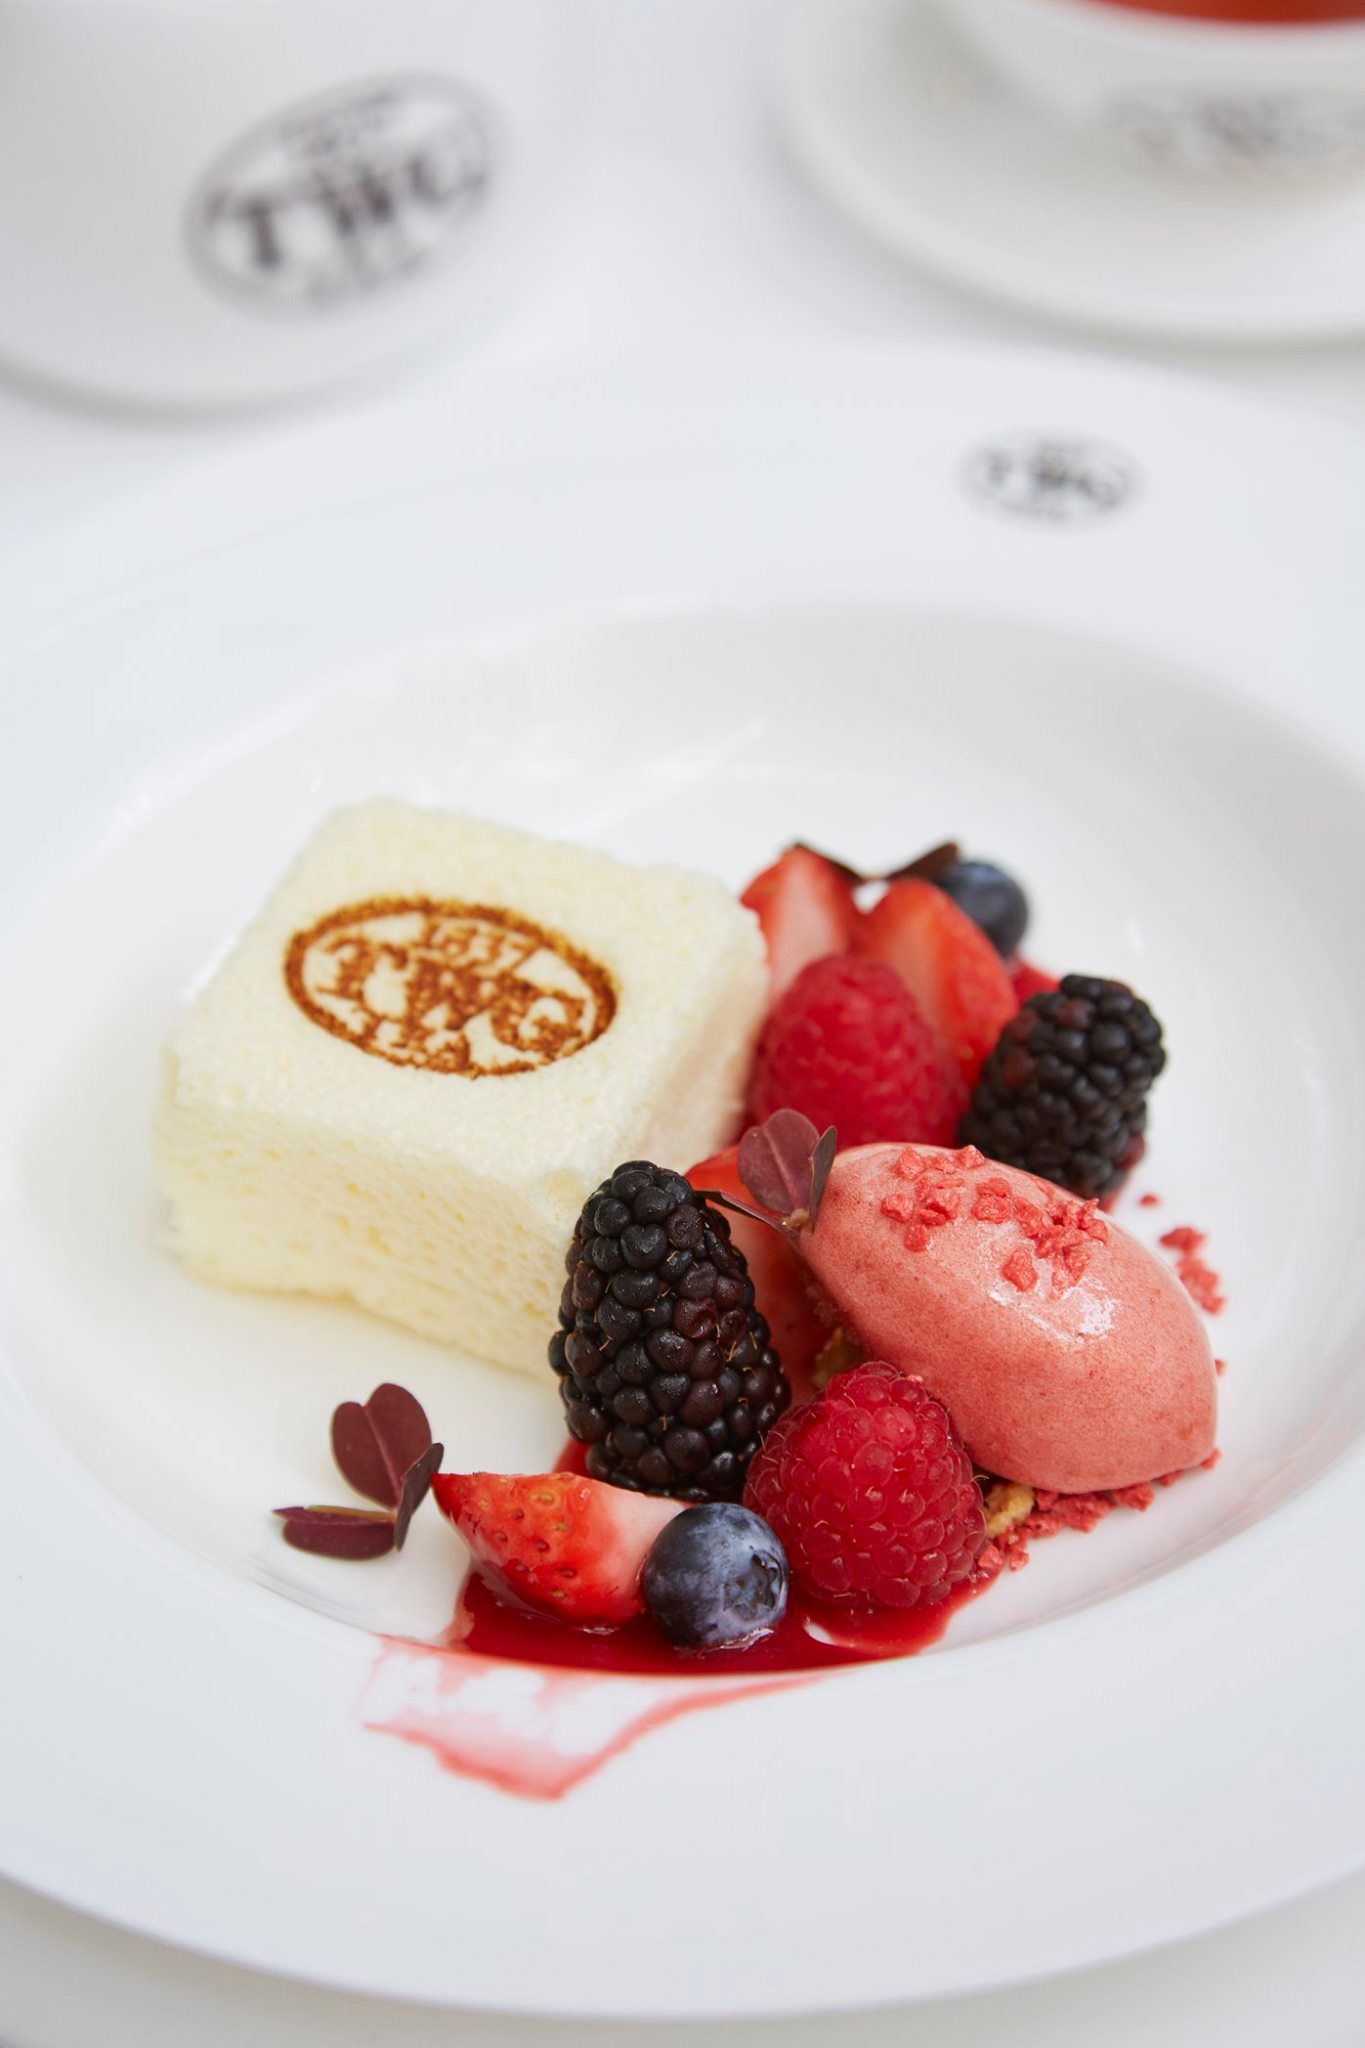 Chase the Monday blues away with our light Japanese cheesecake served with summer berries and a scoop of Timeless Tea and cheese ice cream. Available on this week's set menu at any TWG Tea Salons in Singapore.